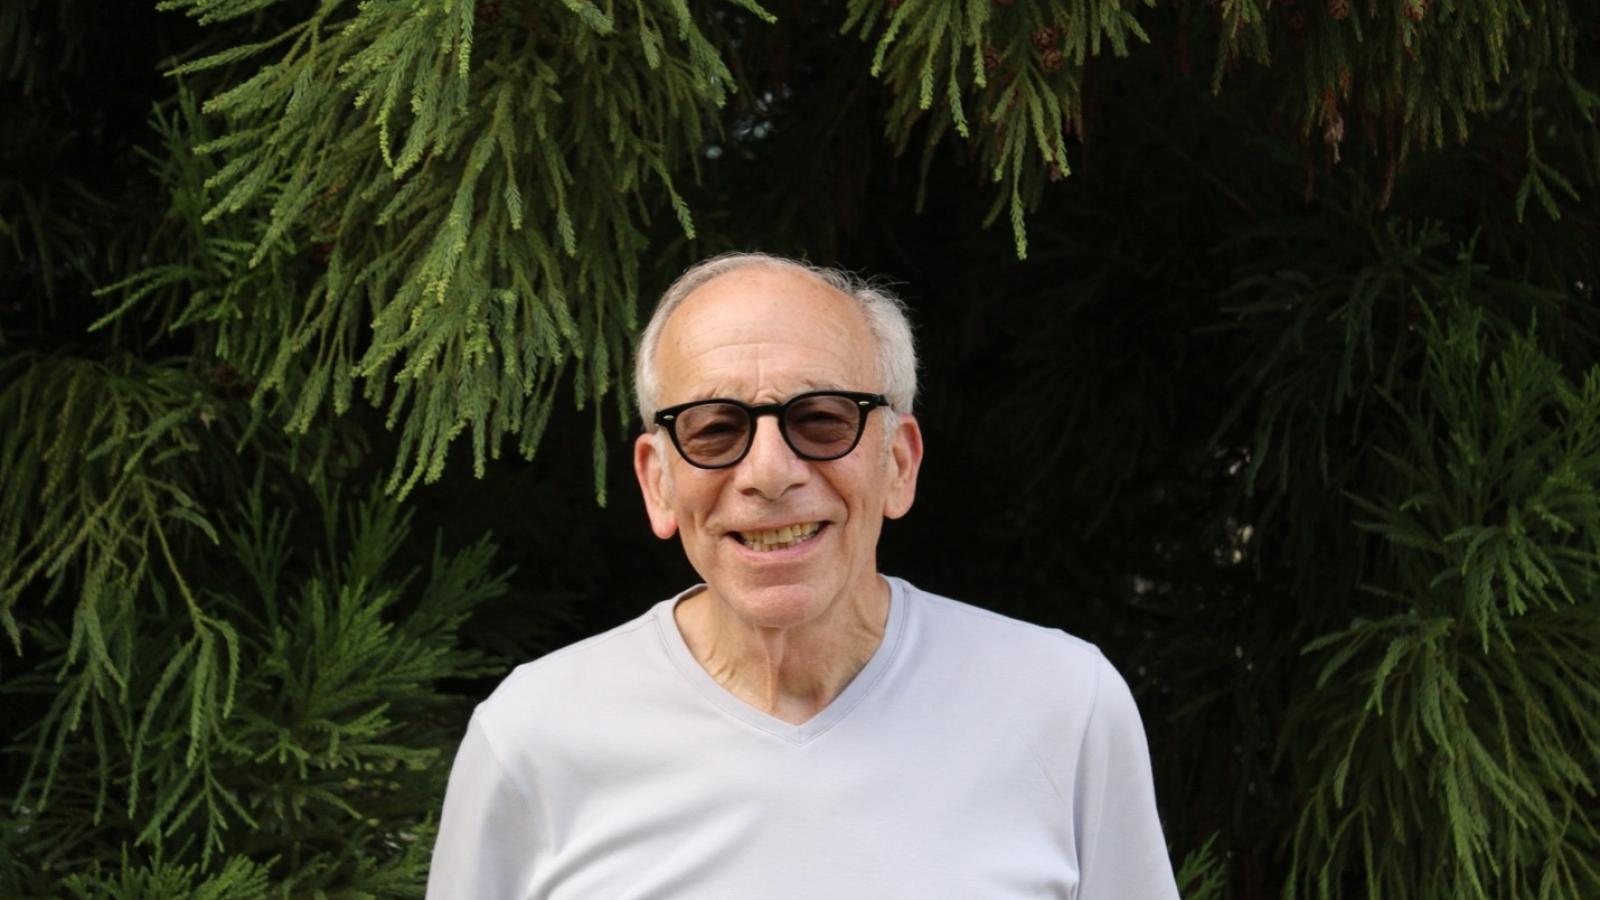 Bruce Hulman in a grey t shirt and darkened glasses in front of trees